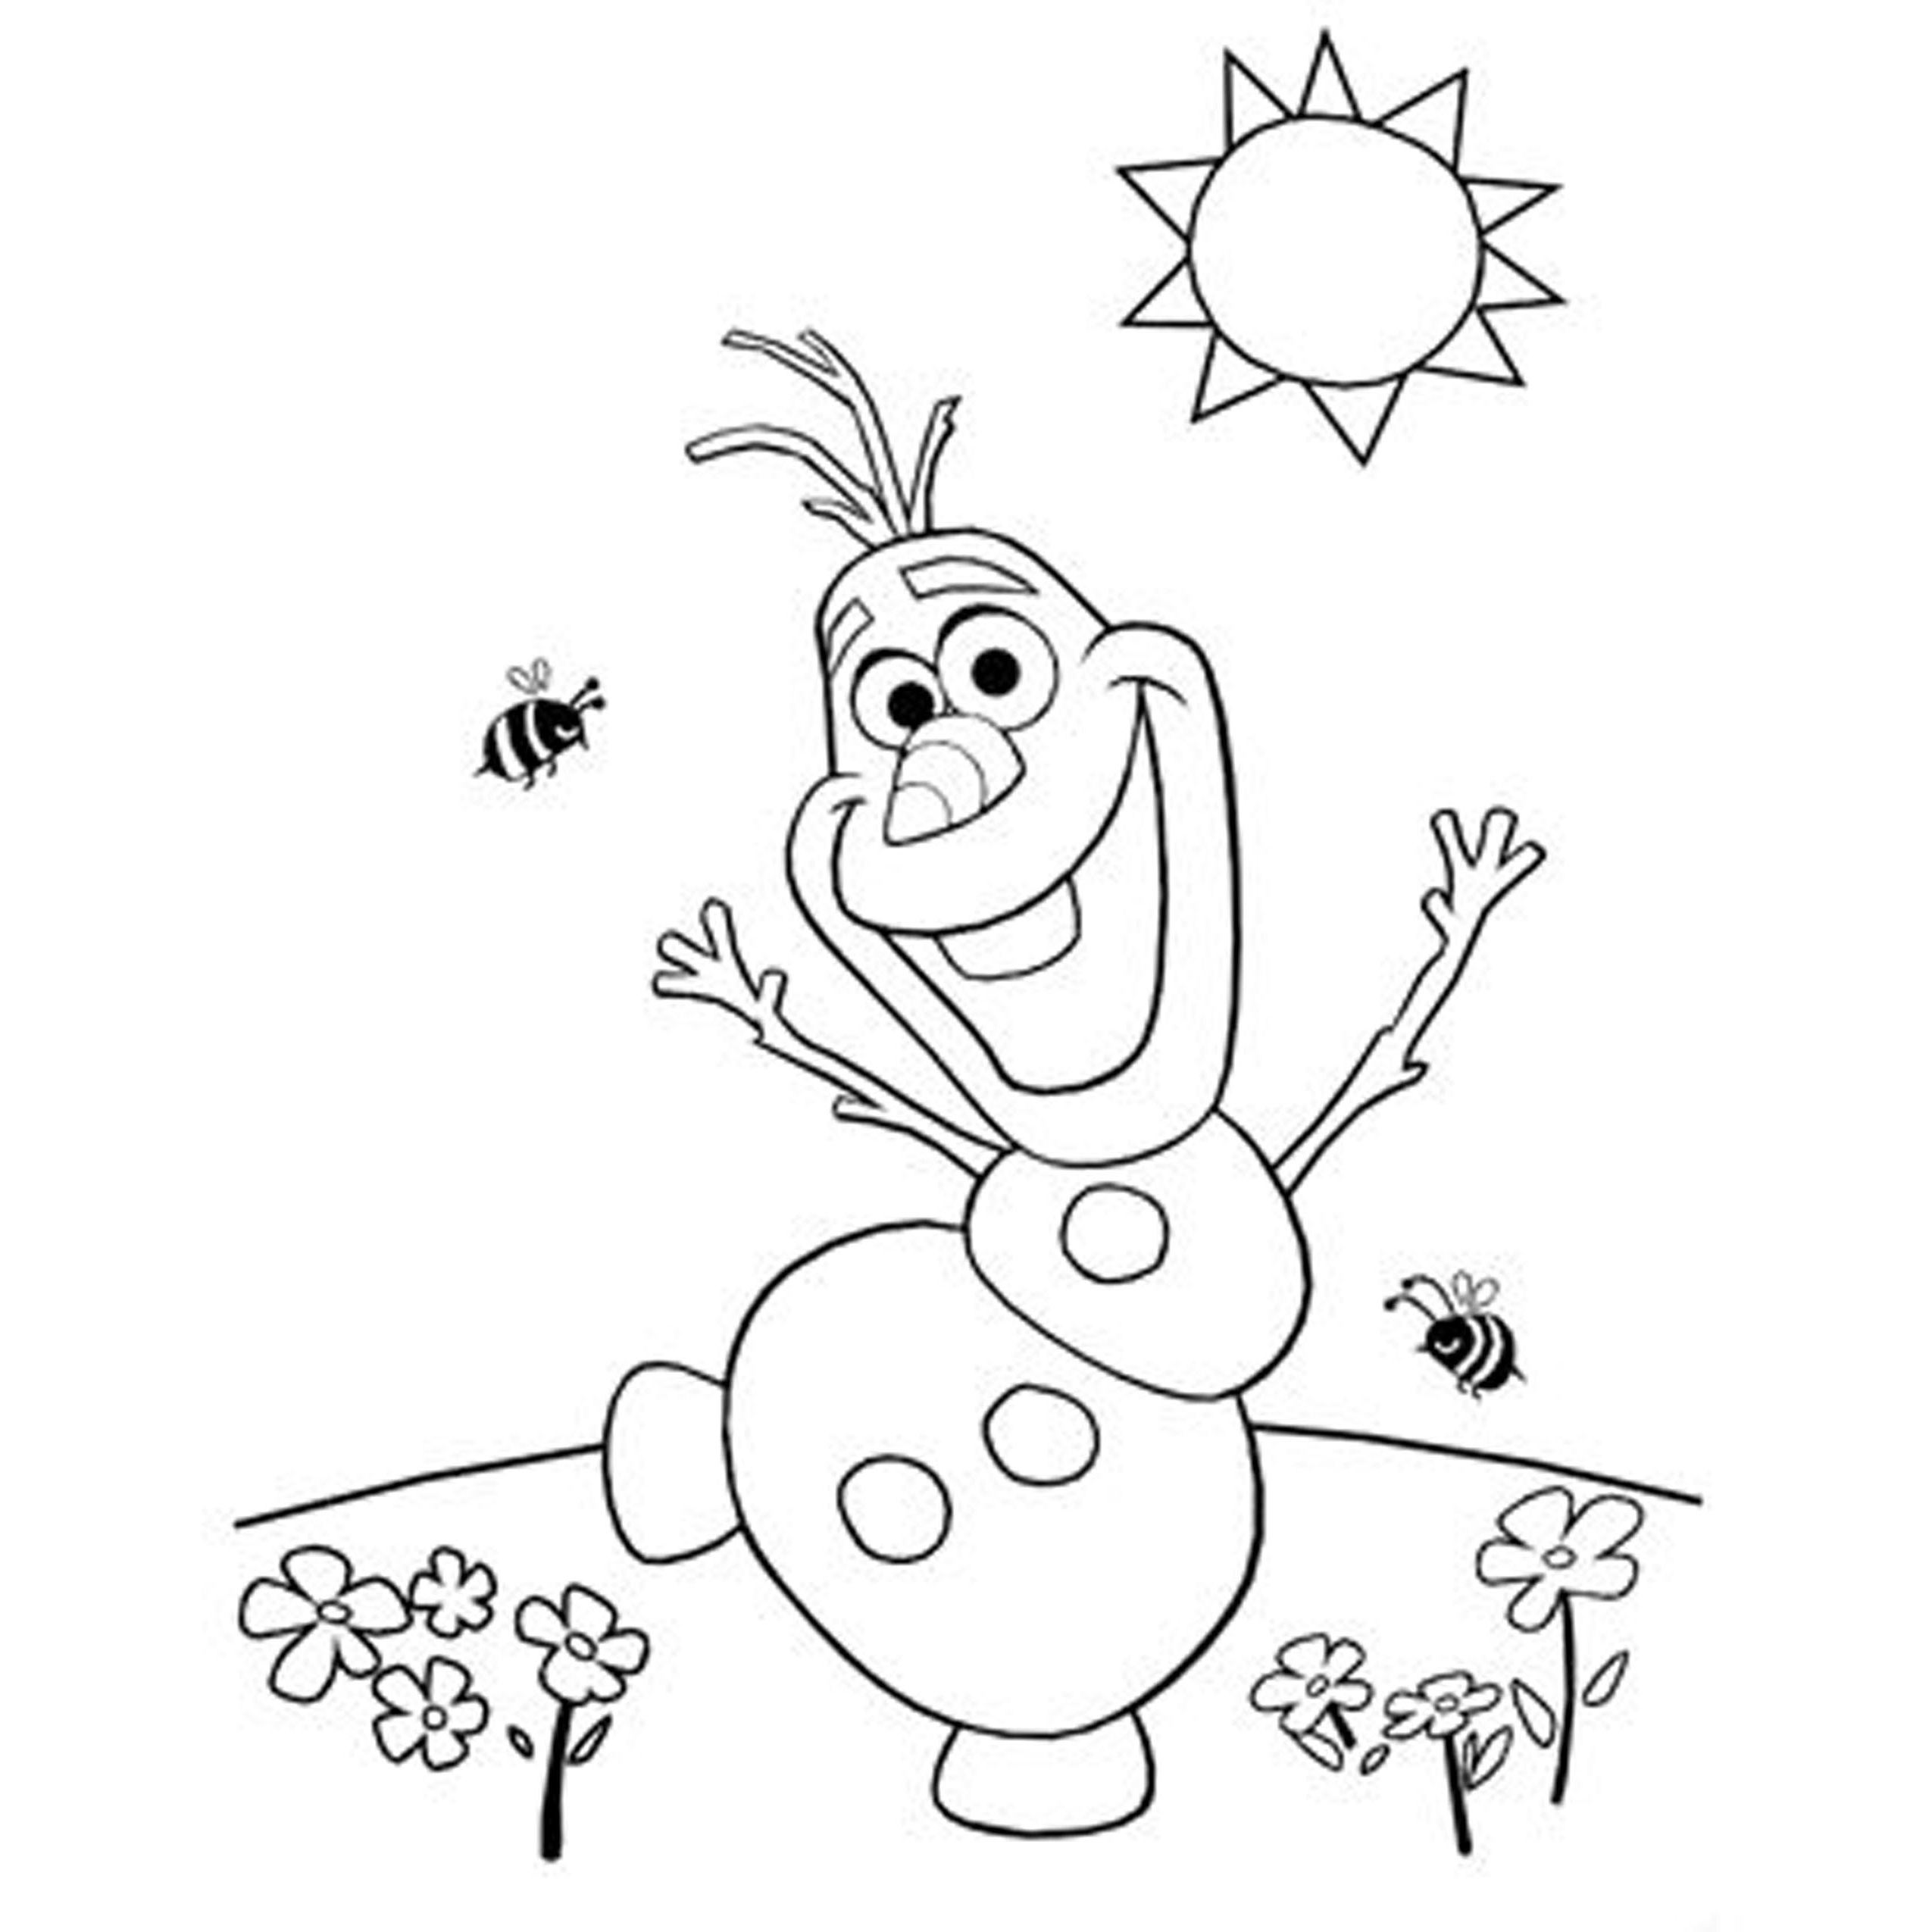 frozen-printable-coloring-pages